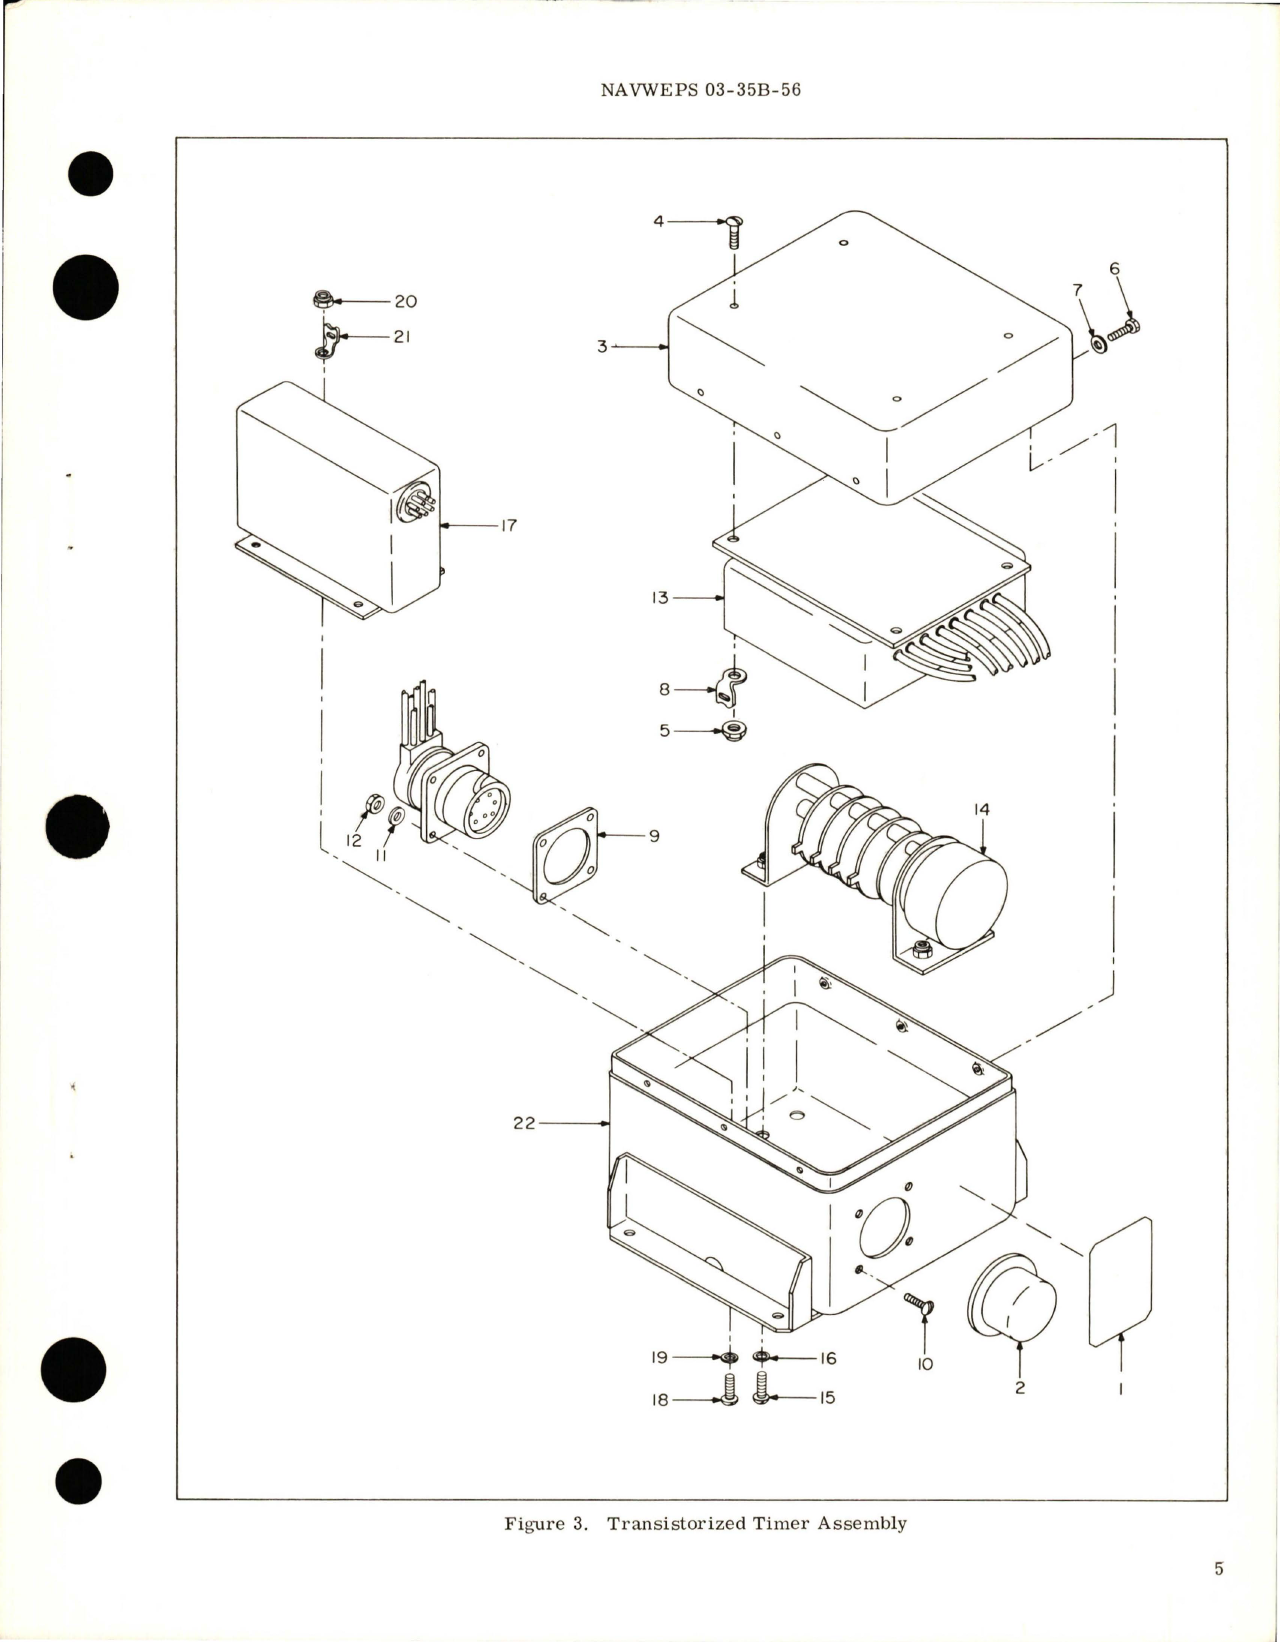 Sample page 5 from AirCorps Library document: Overhaul Instructions with Parts Breakdown for Transistorized Timer Assembly - Part 42E09-4A 